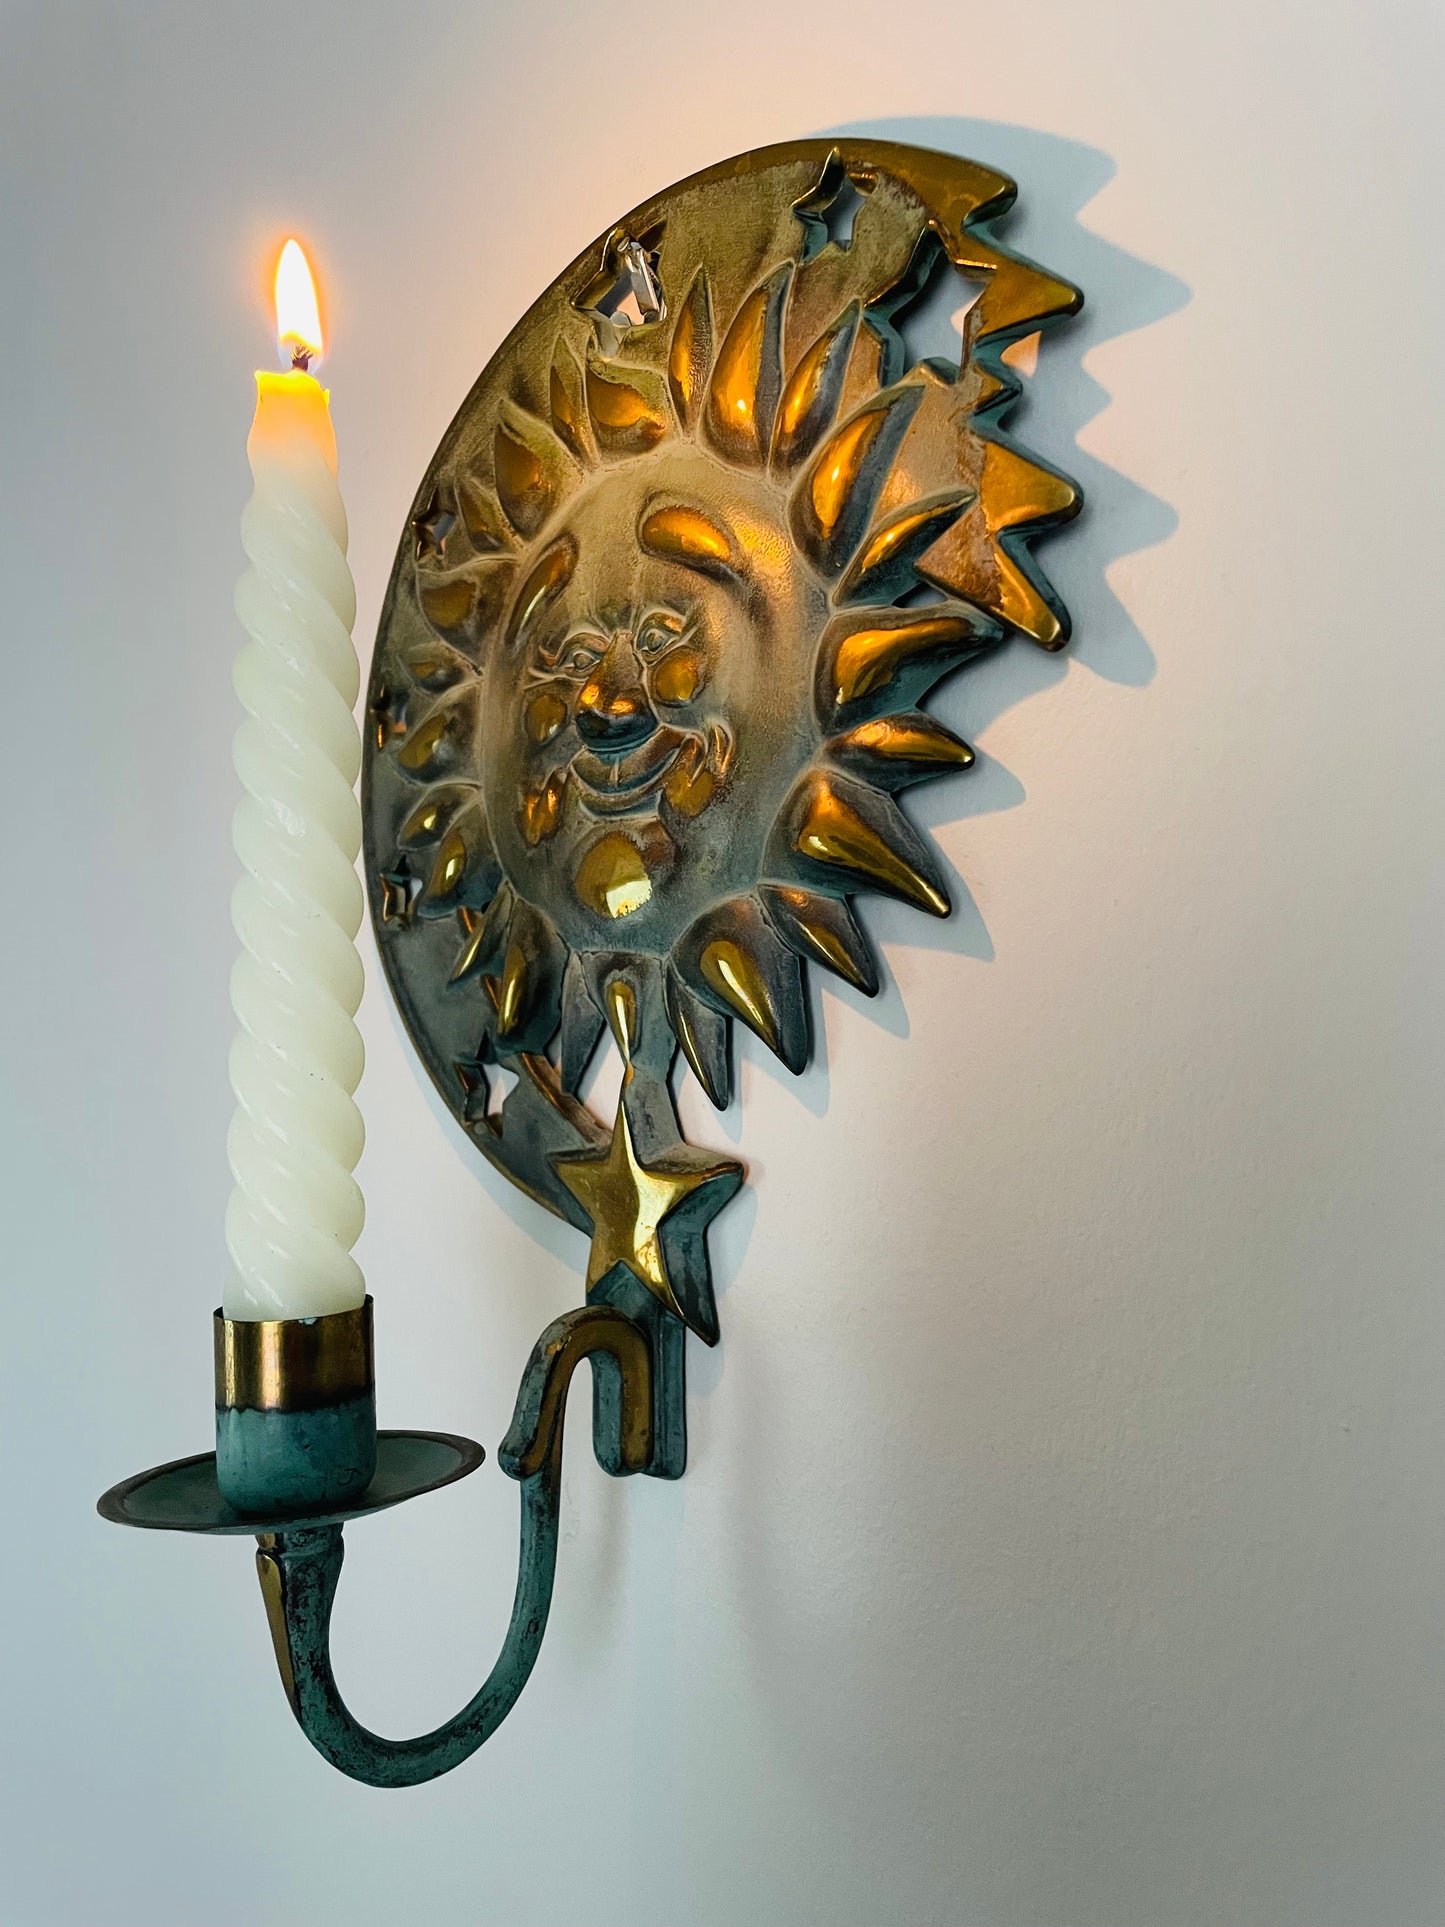 1990s Partylite Celestial Sun and Stars Candle Holder Wall Sconce